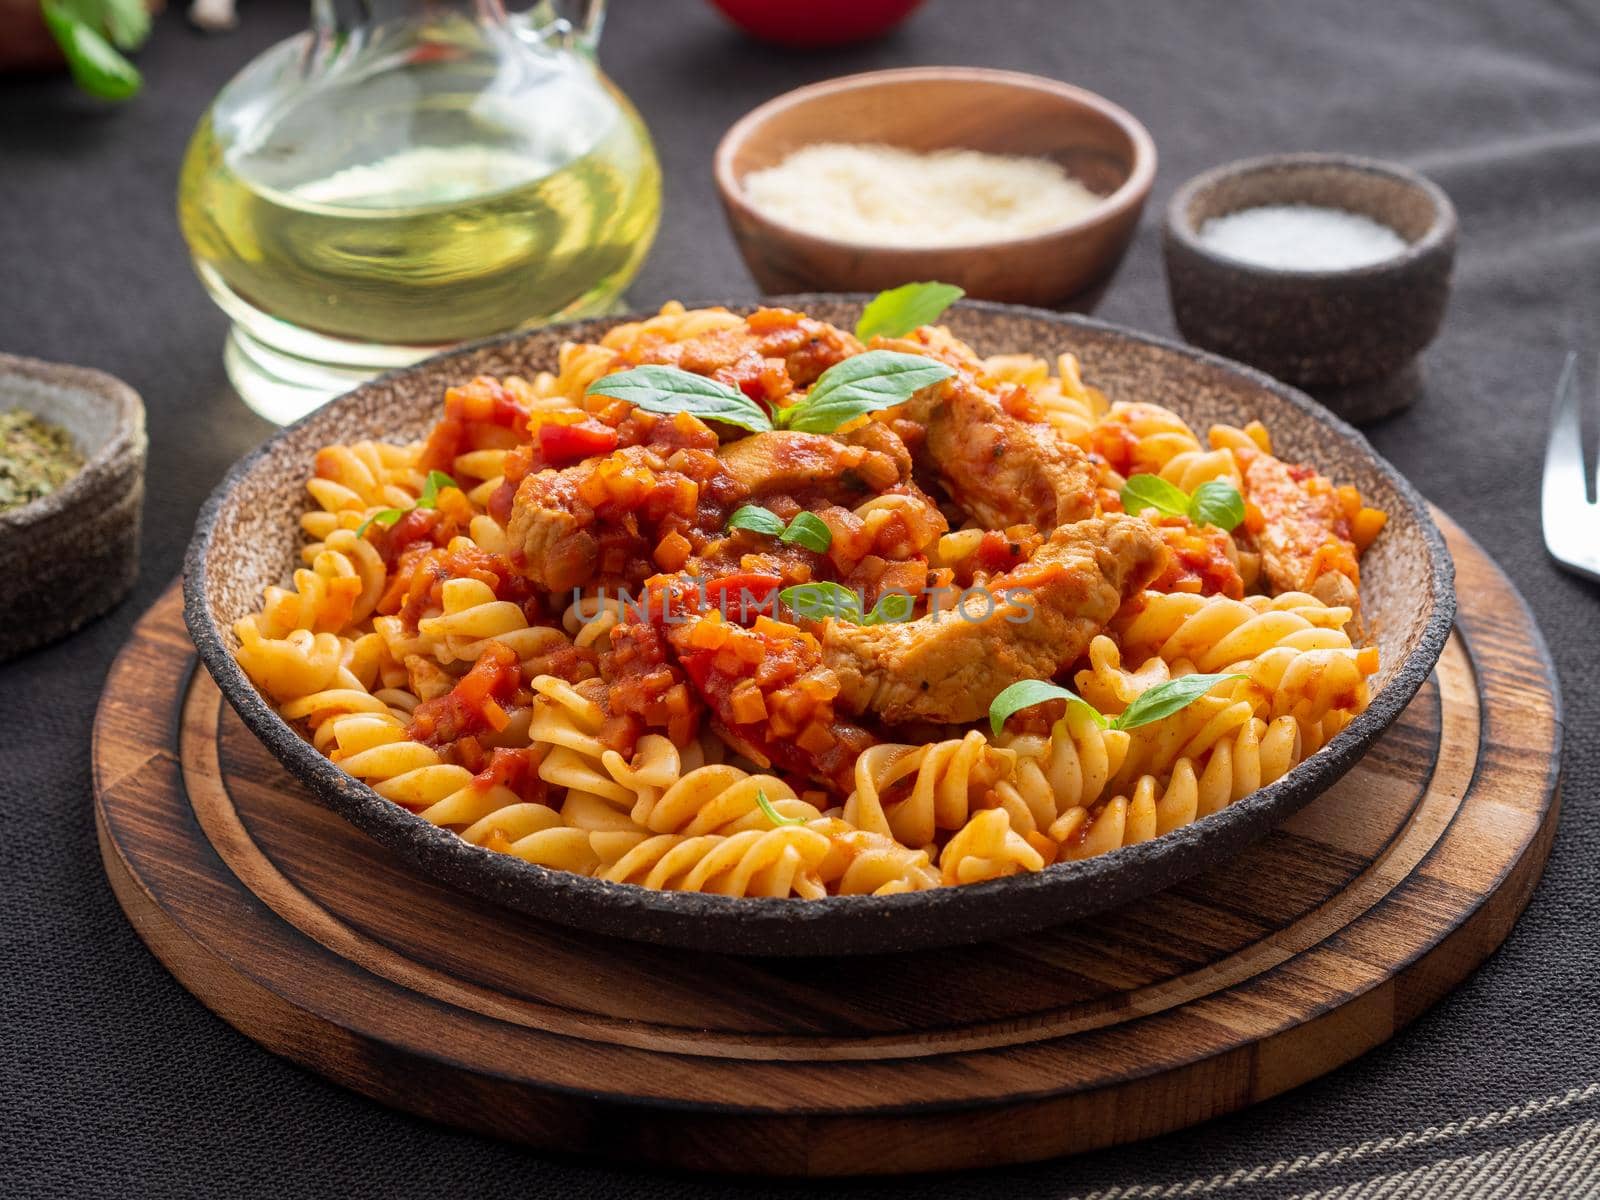 fusilli pasta with tomato sauce, chicken fillet with basil leaves on dark brown background, side view.